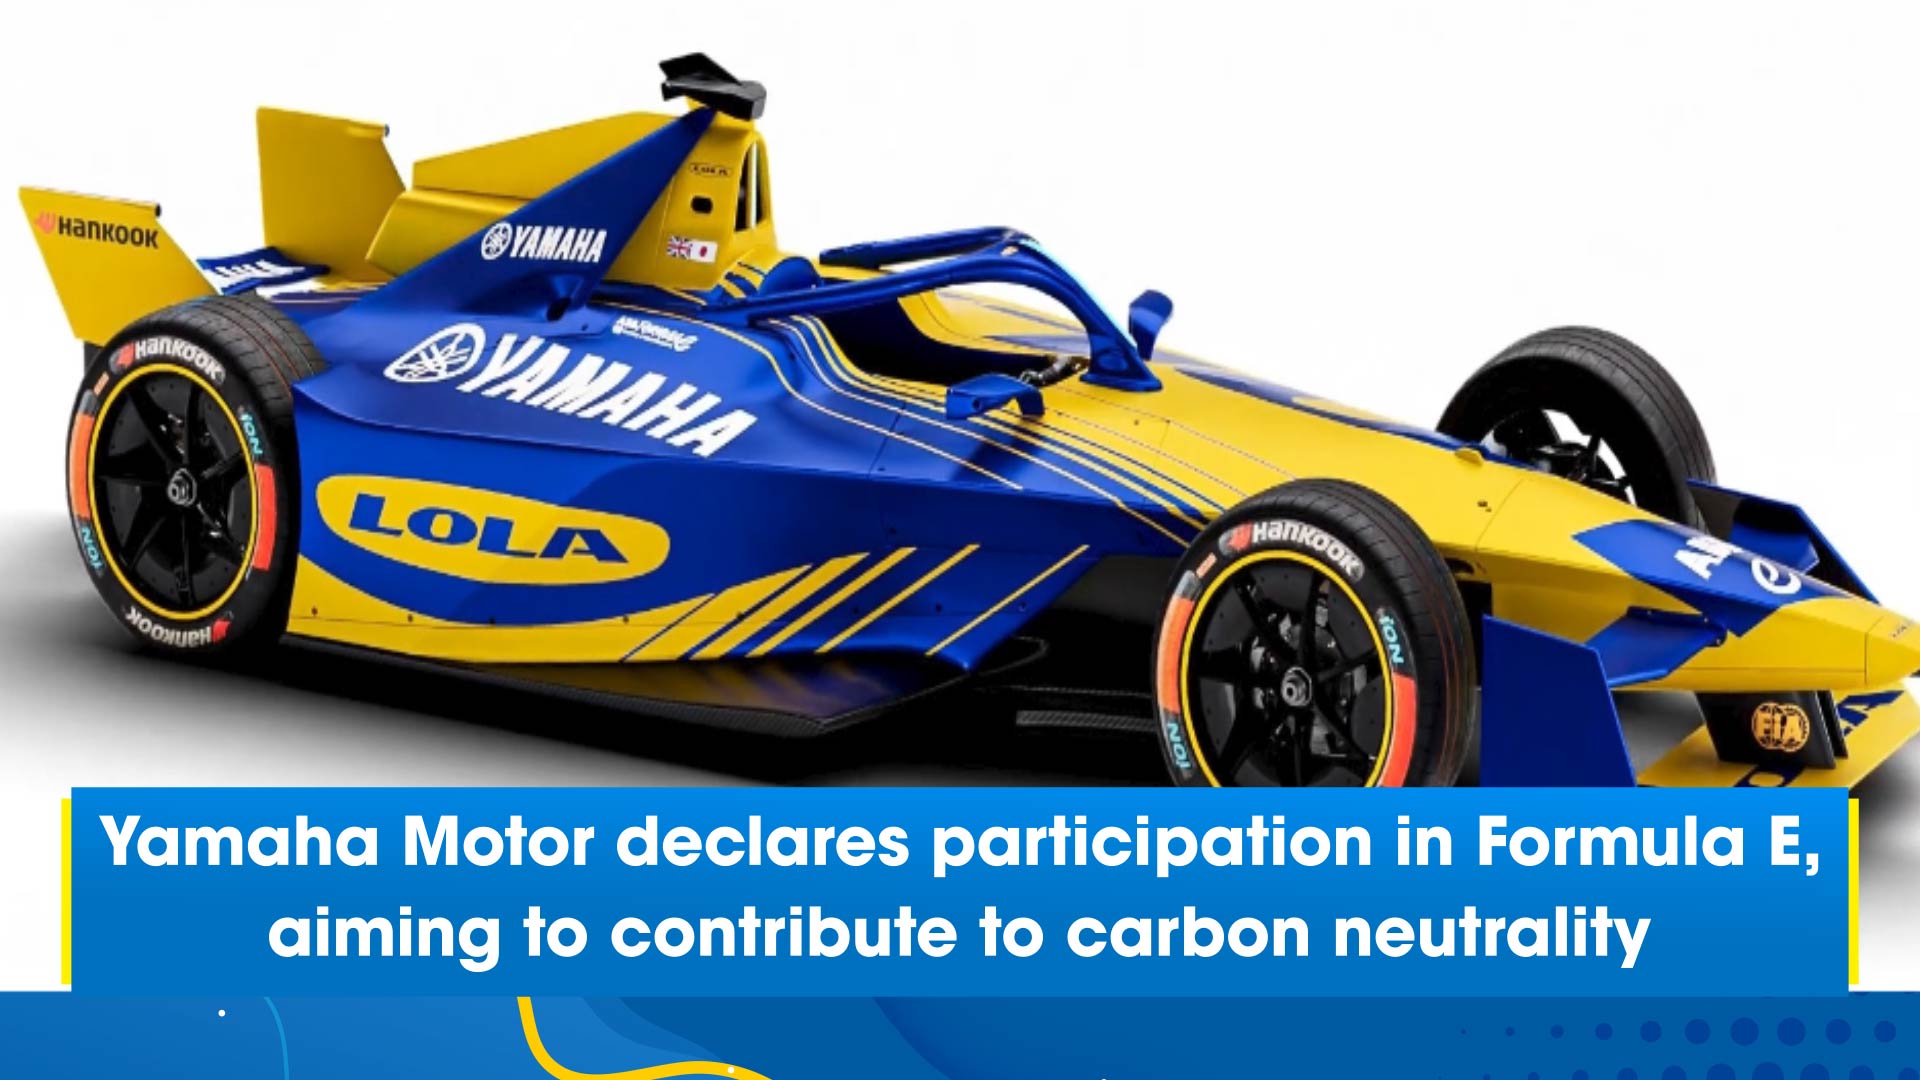 Yamaha Motor declares participation in Formula E, aiming to contribute to carbon neutrality